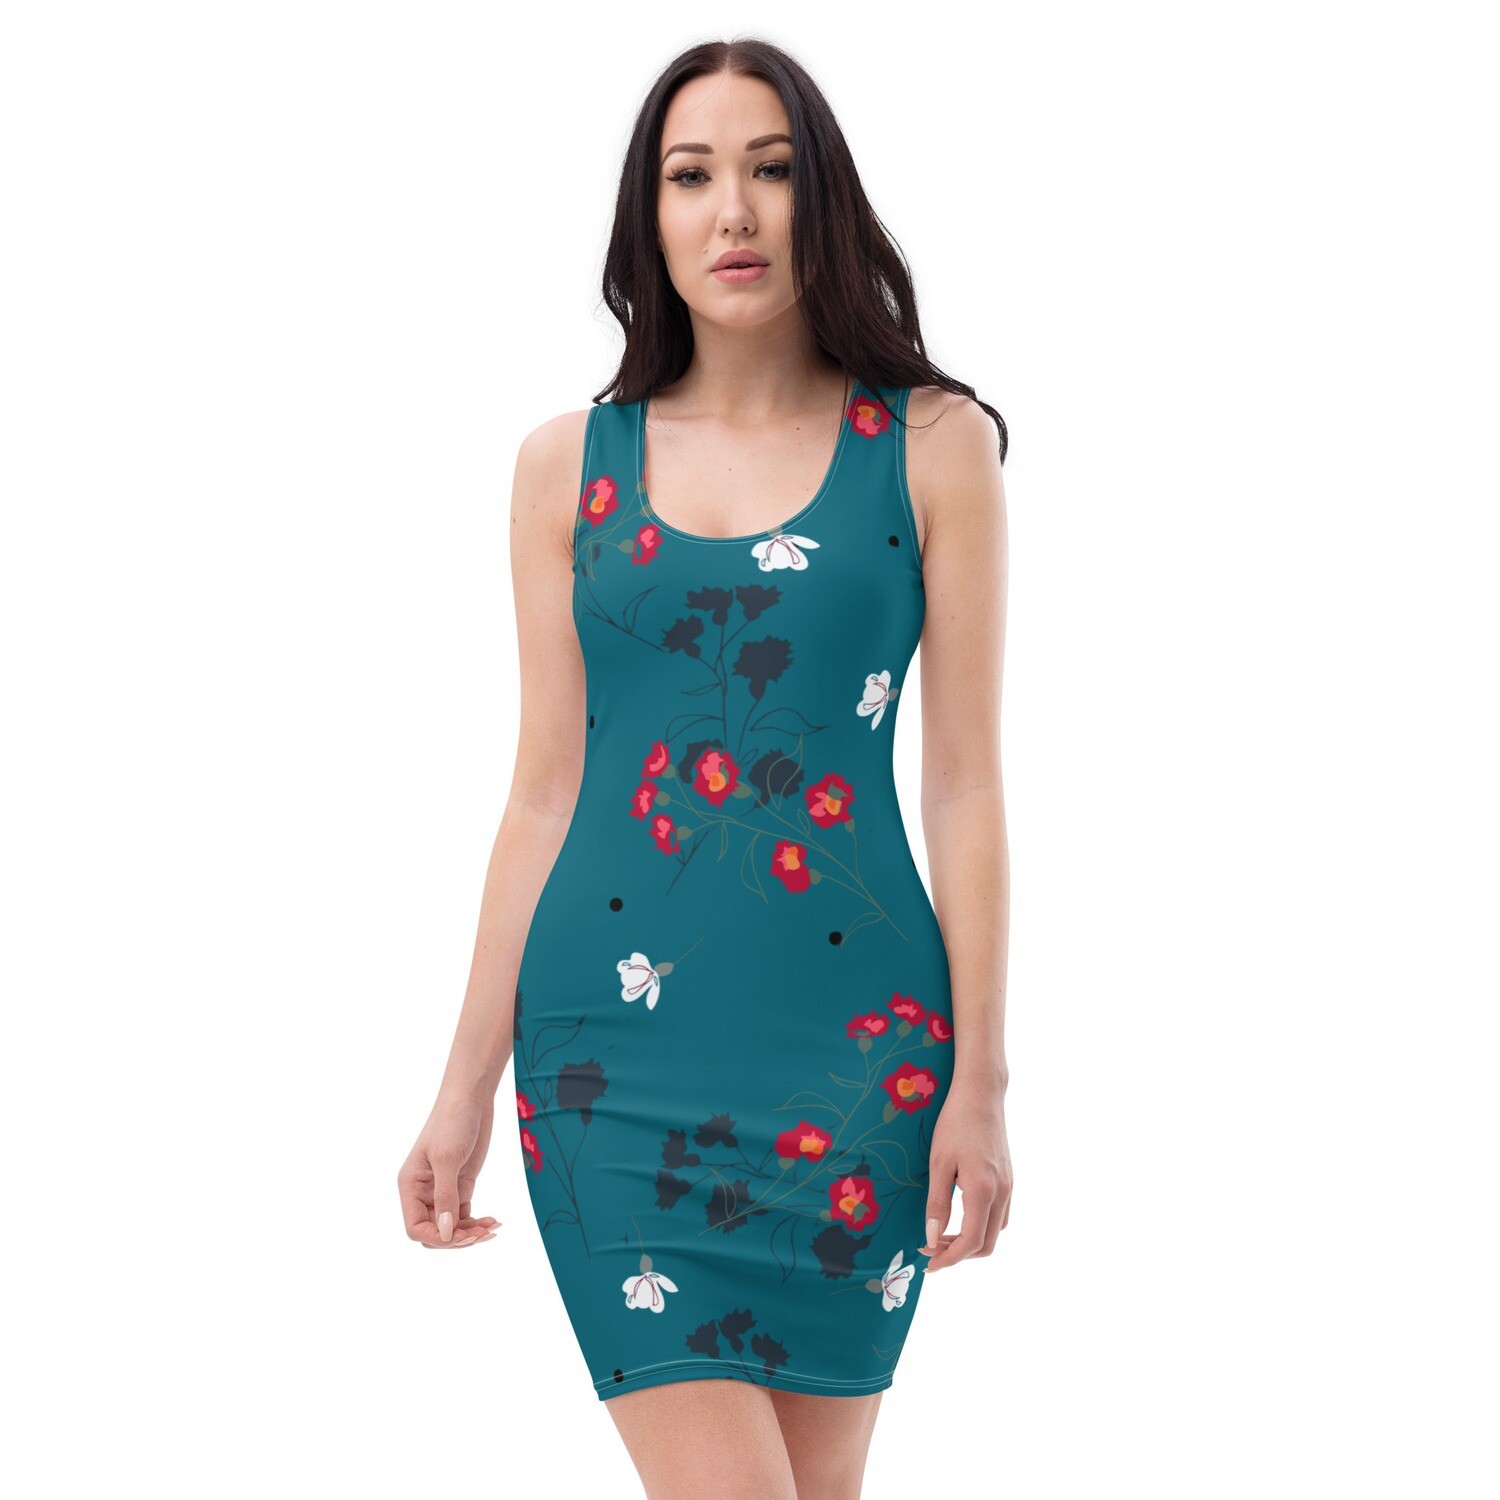 Turquoise stretchy mini dress with meadow flowers